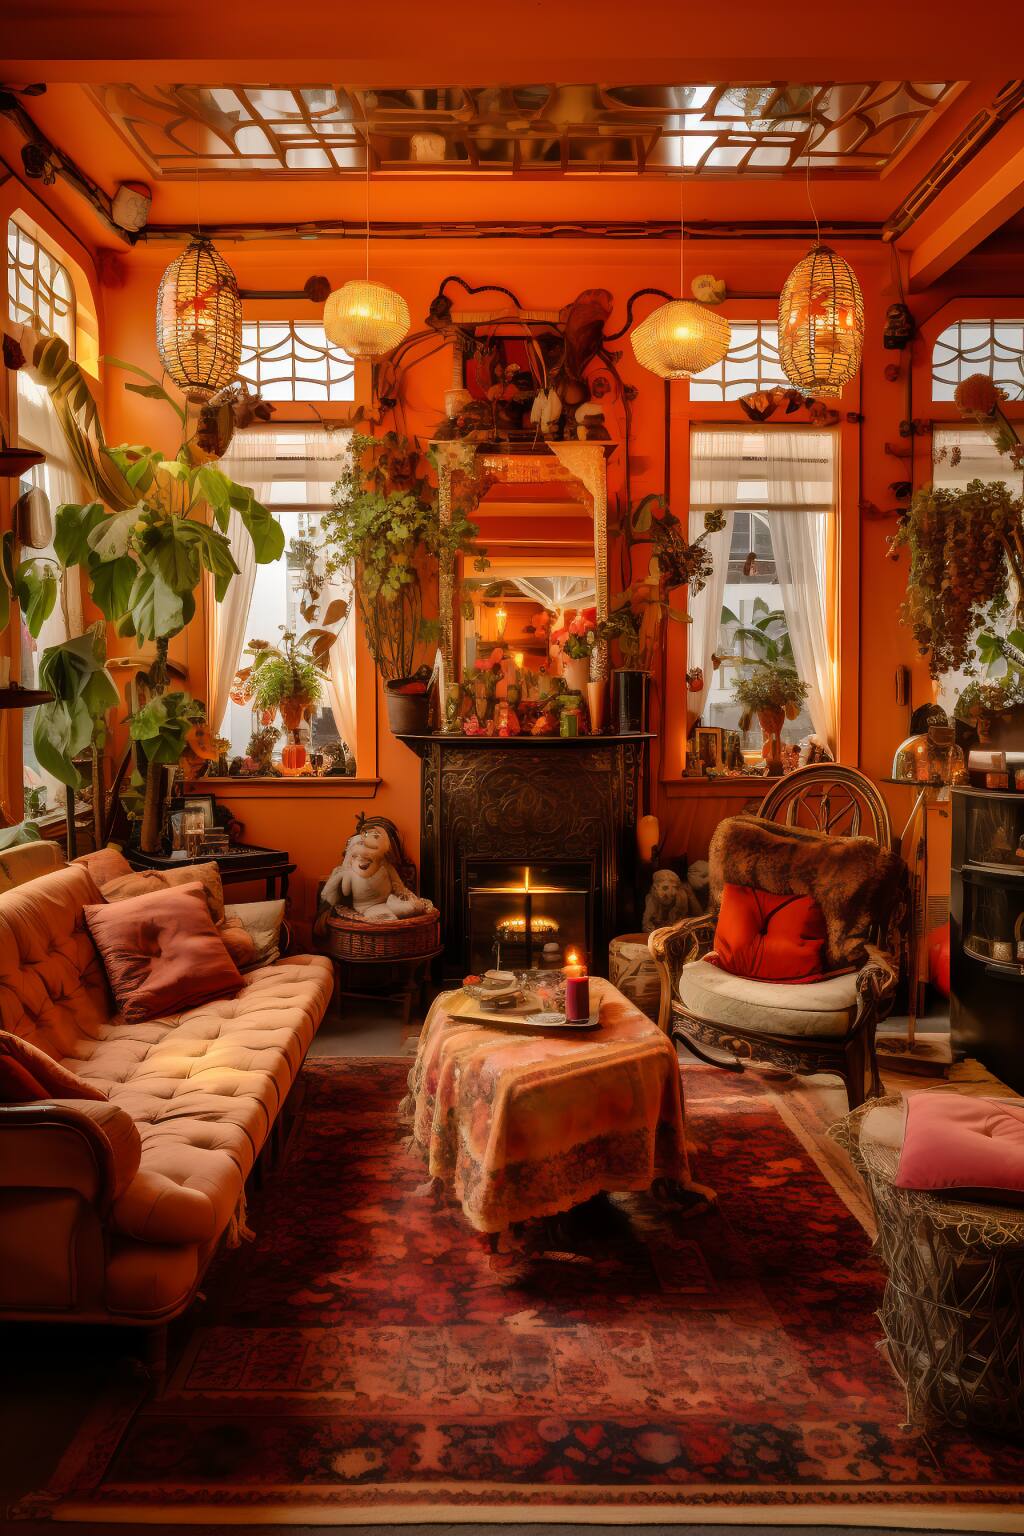 Vintage-Inspired Bohemian Living Room In Peach And Cream, Featuring Floral Sofas, Antique Wooden Furniture, And Vintage Trinkets.